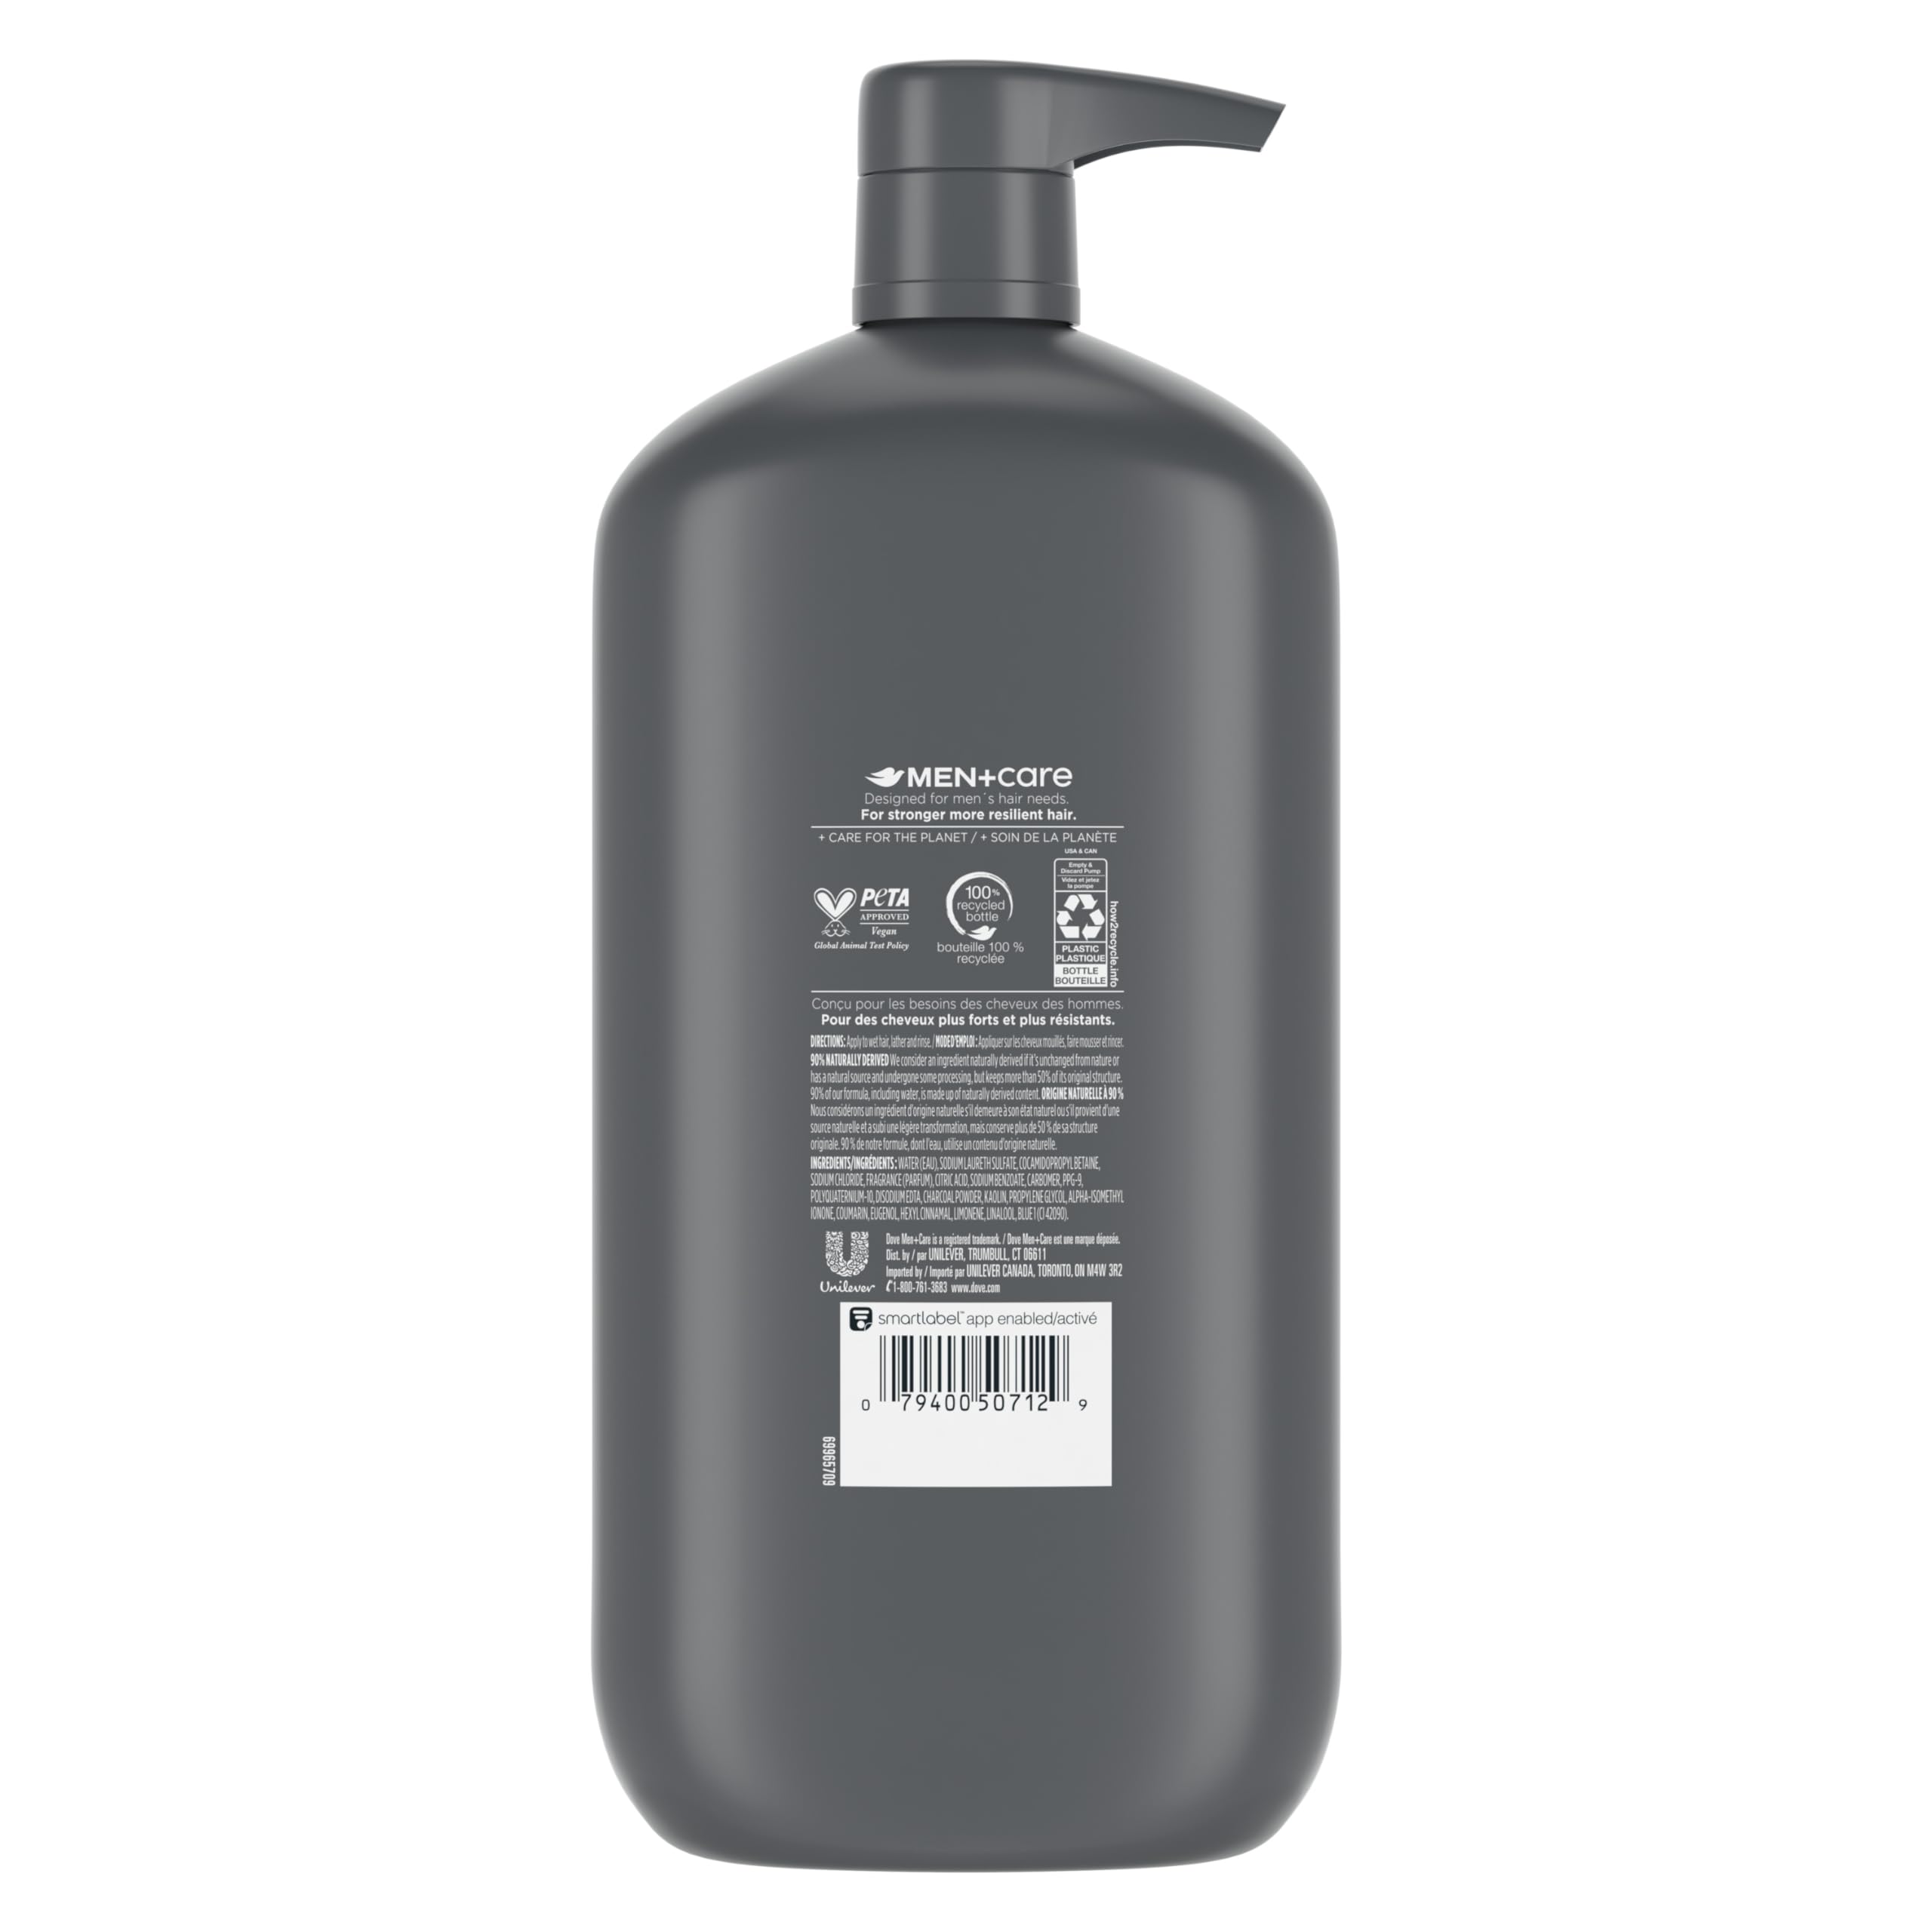 DOVE MEN+CARE DV M SH Charcoal 4p 31z Pump Purifying Shampoo Charcoal + Clay for Stronger, More Resilient Hair, with Plant-Based Cleansers, 31 oz